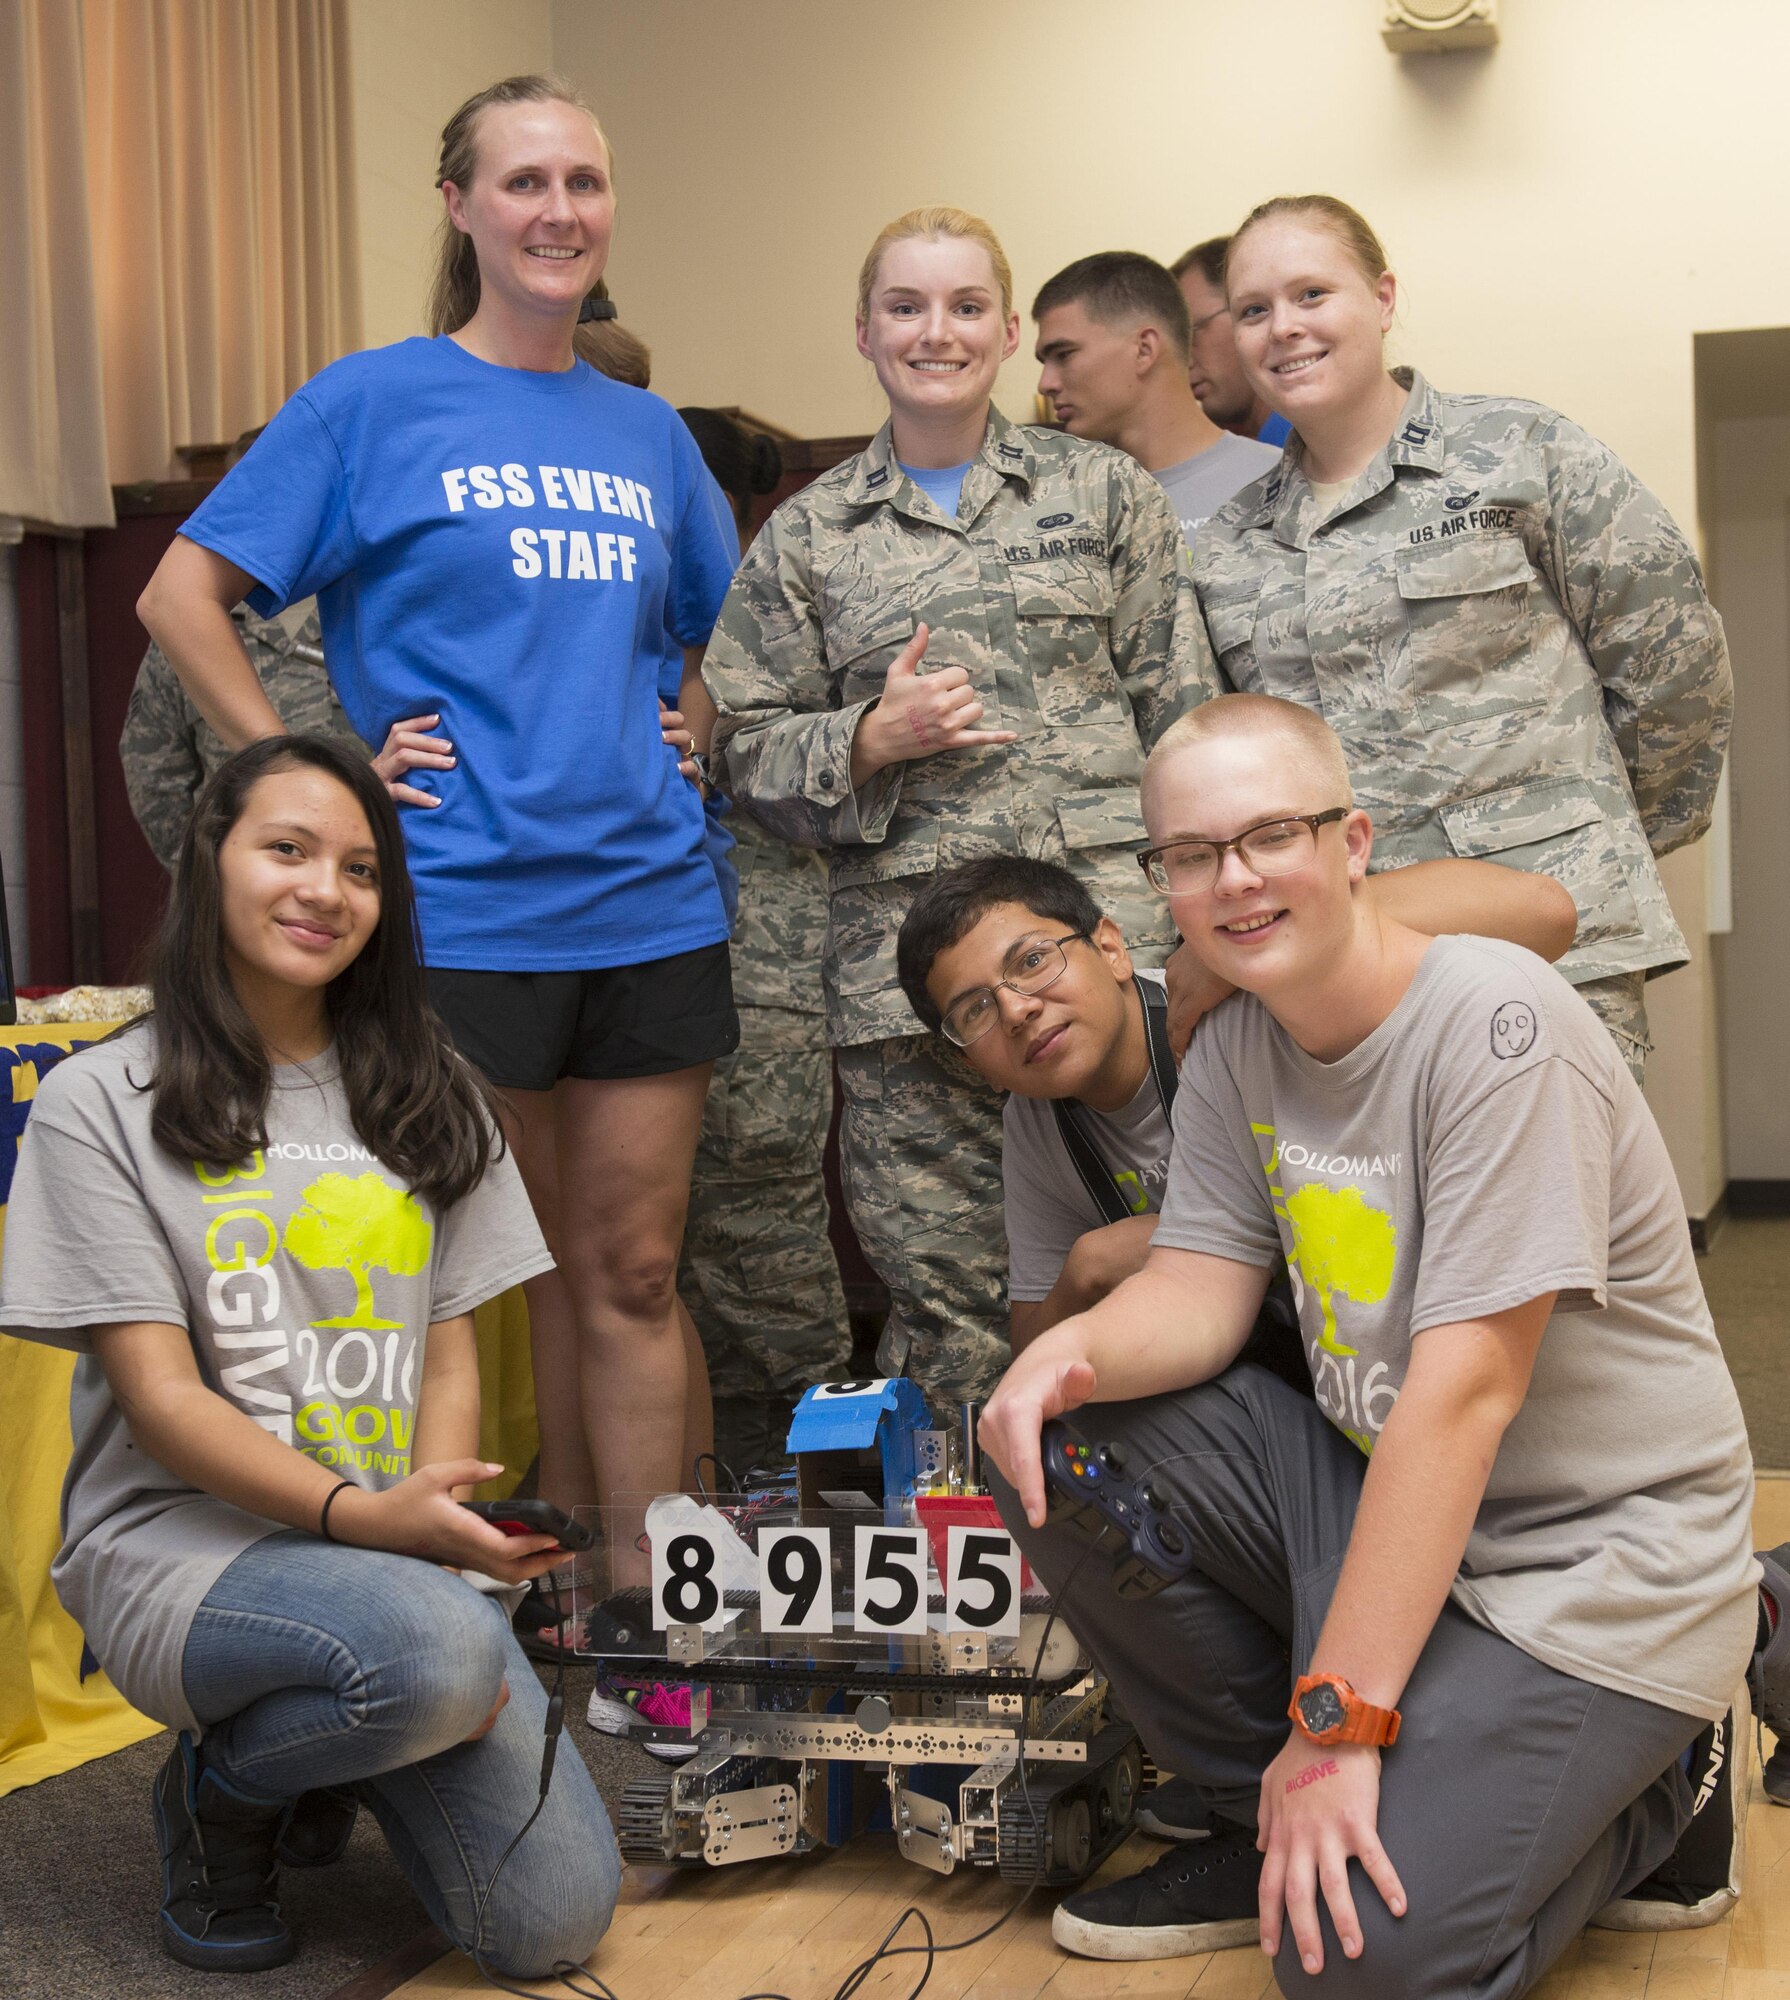 Members from team R2D2 pose with their robot during the Big Give after-party August 12, 2016 at Holloman Air Force Base, N.M. Over the course of three weeks, 32 teams of 412 participants spent nearly 5,000 man hours volunteering in the local community — saving the area $202,092.33. (Last names are being withheld due to operational requirements. U.S. Air Force photo by Airman 1st Class Randahl J. Jenson)